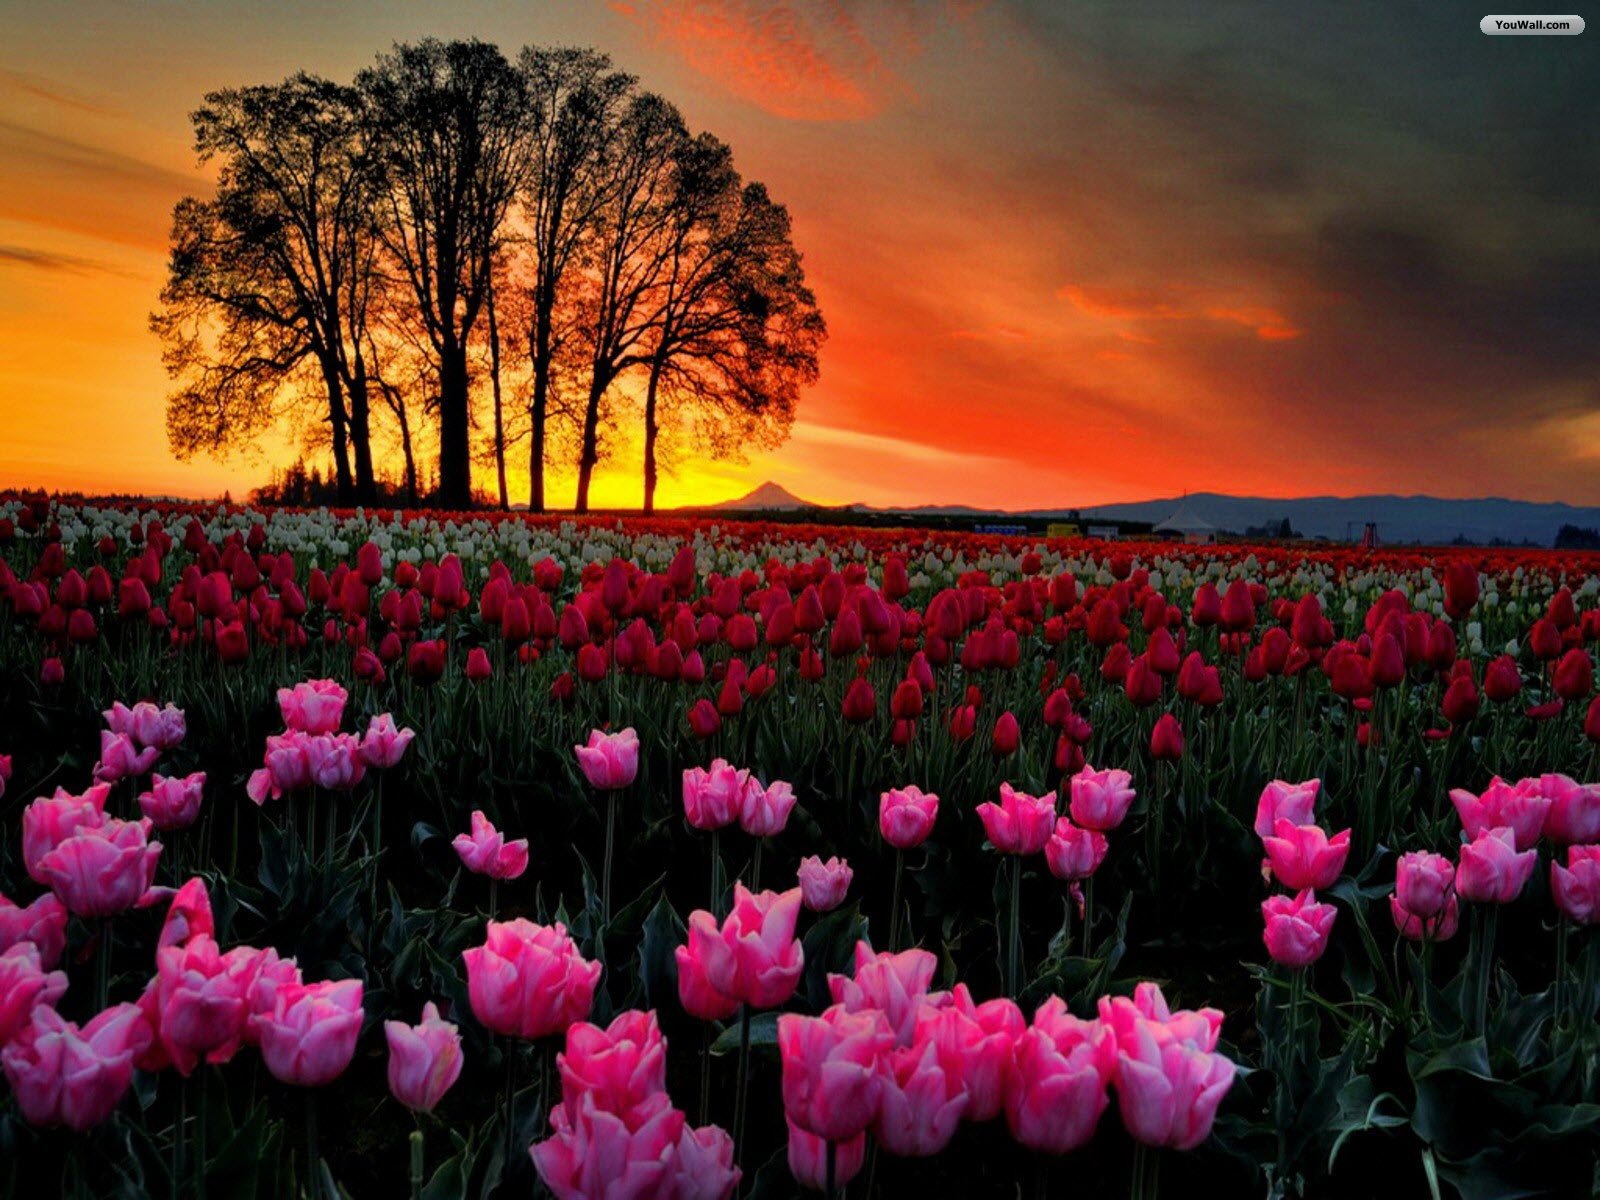 YouWall - Tulips at Sunset Wallpaper - wallpaper,wallpapers,free ...